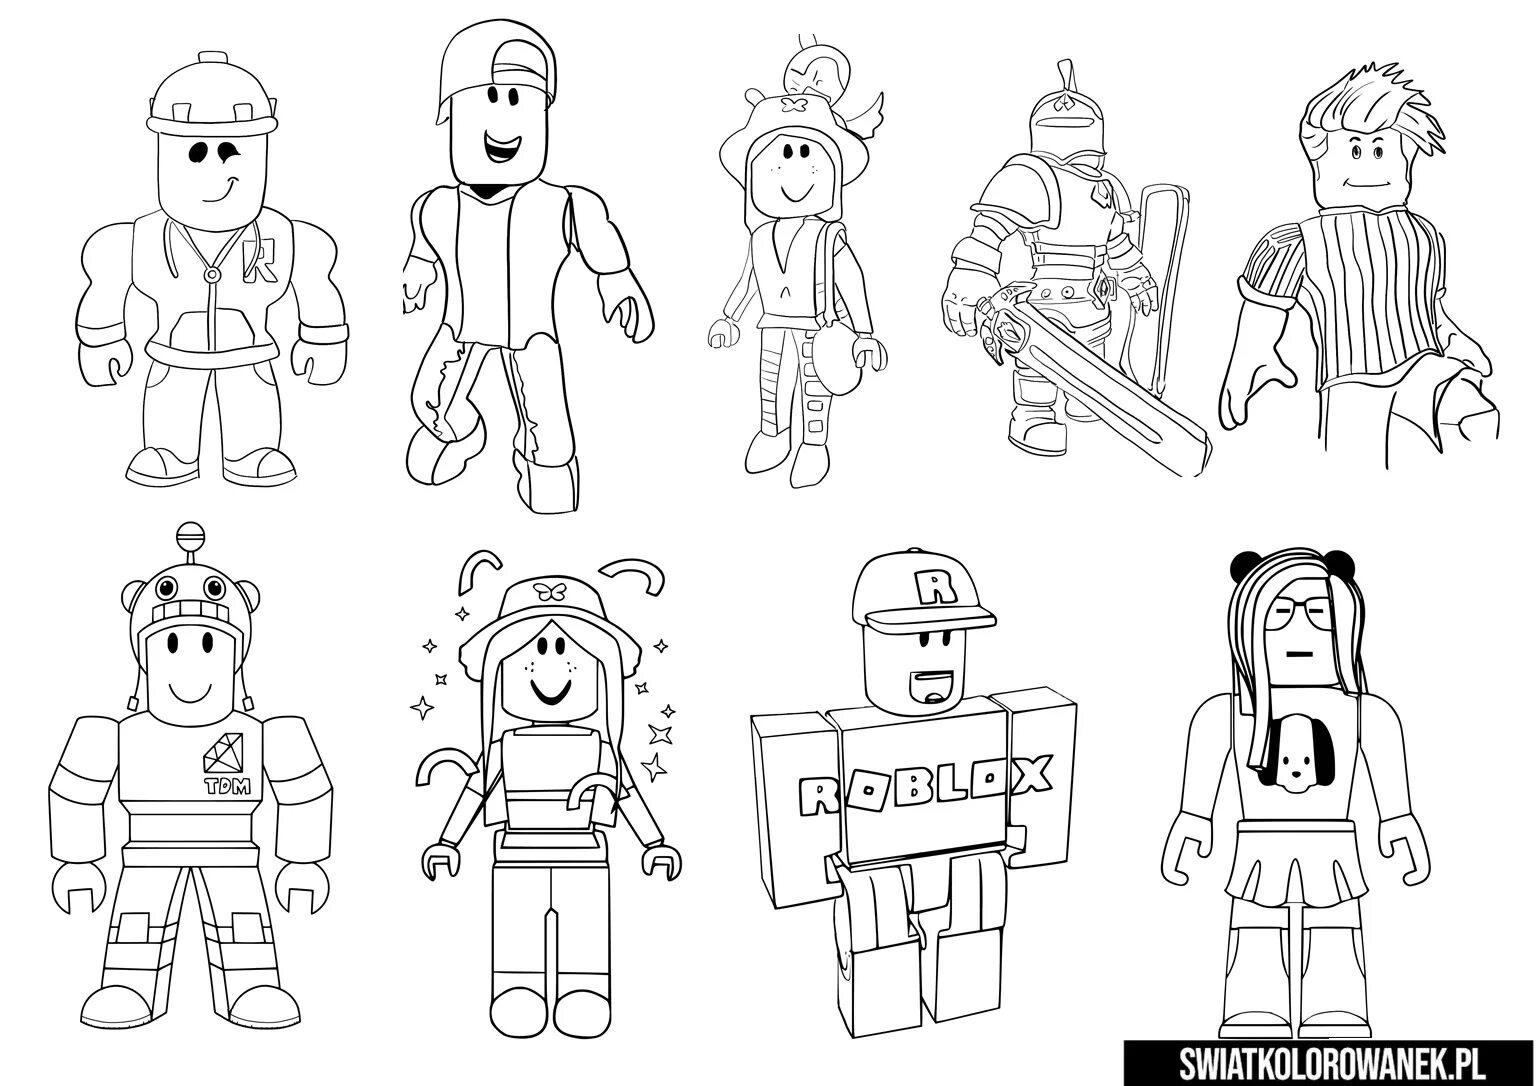 Roblox characters #1